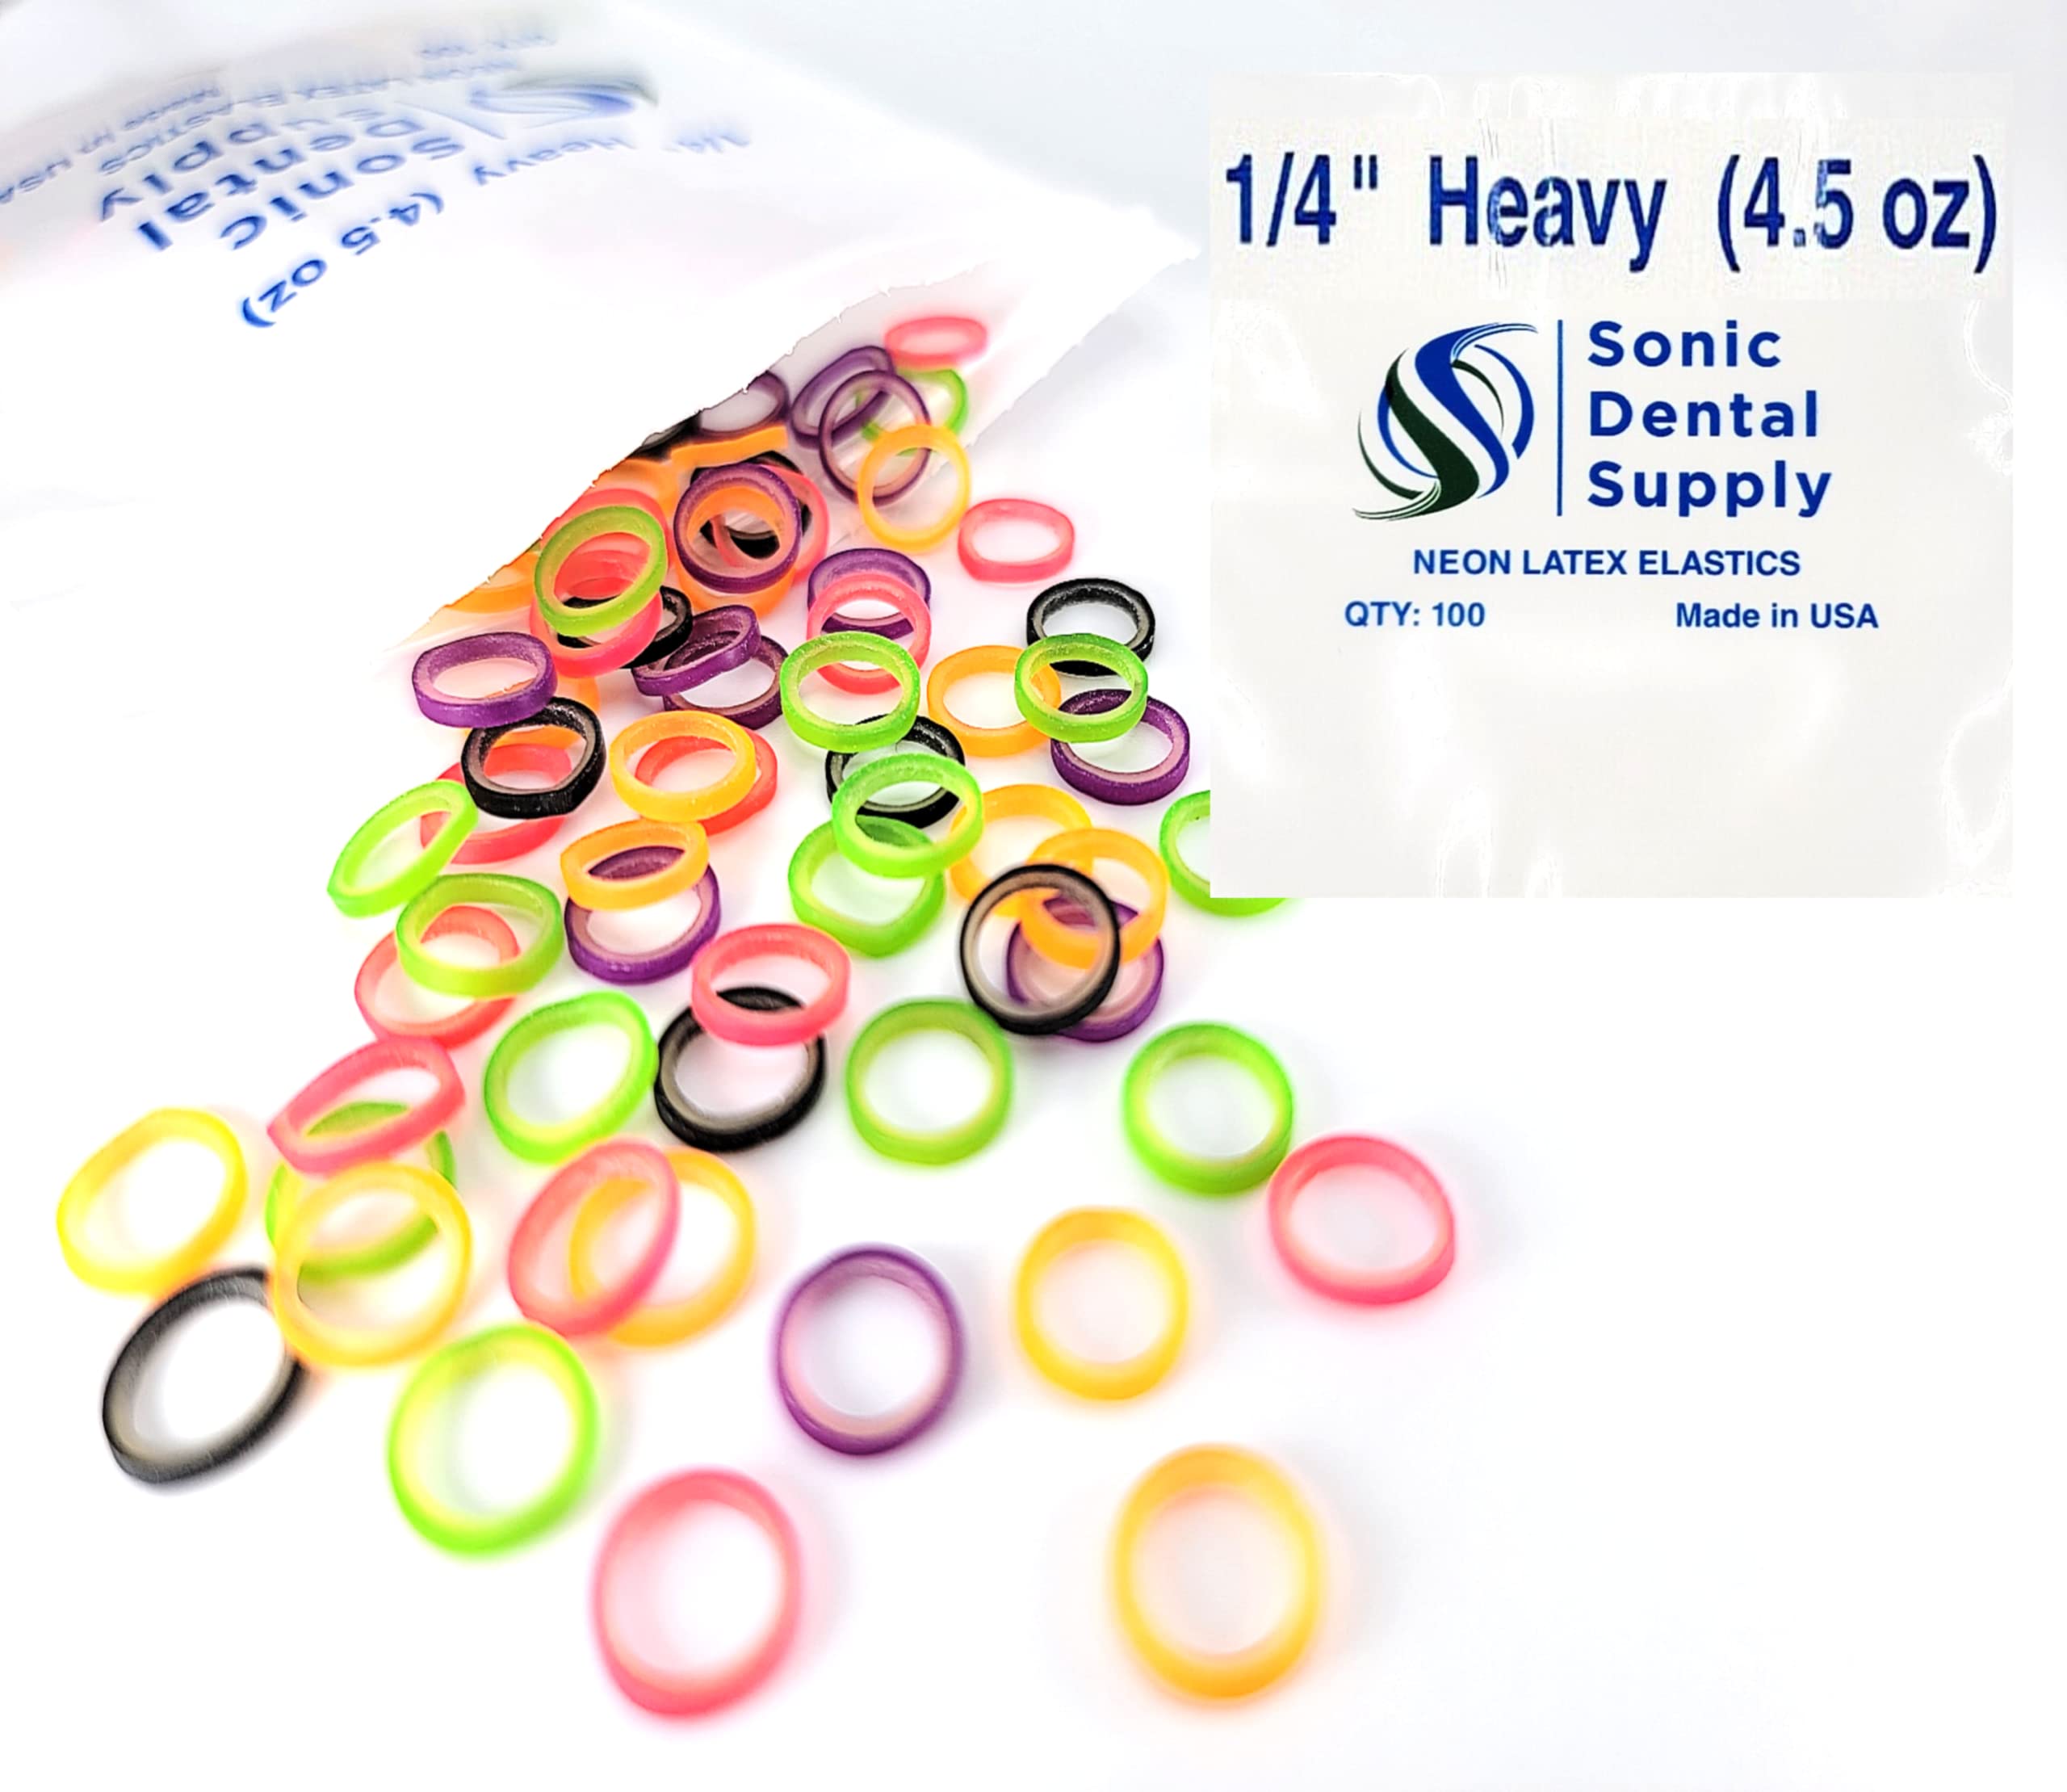 1/4 Inch Orthodontic Elastic Rubber Bands - 100 Bands - Neon Latex Heavy  4.5 Ounce Small Rubberbands Braces Dreadlocks Hair Braids Tooth Gap  Packaging Crafts - Sonic Dental - Made in USA